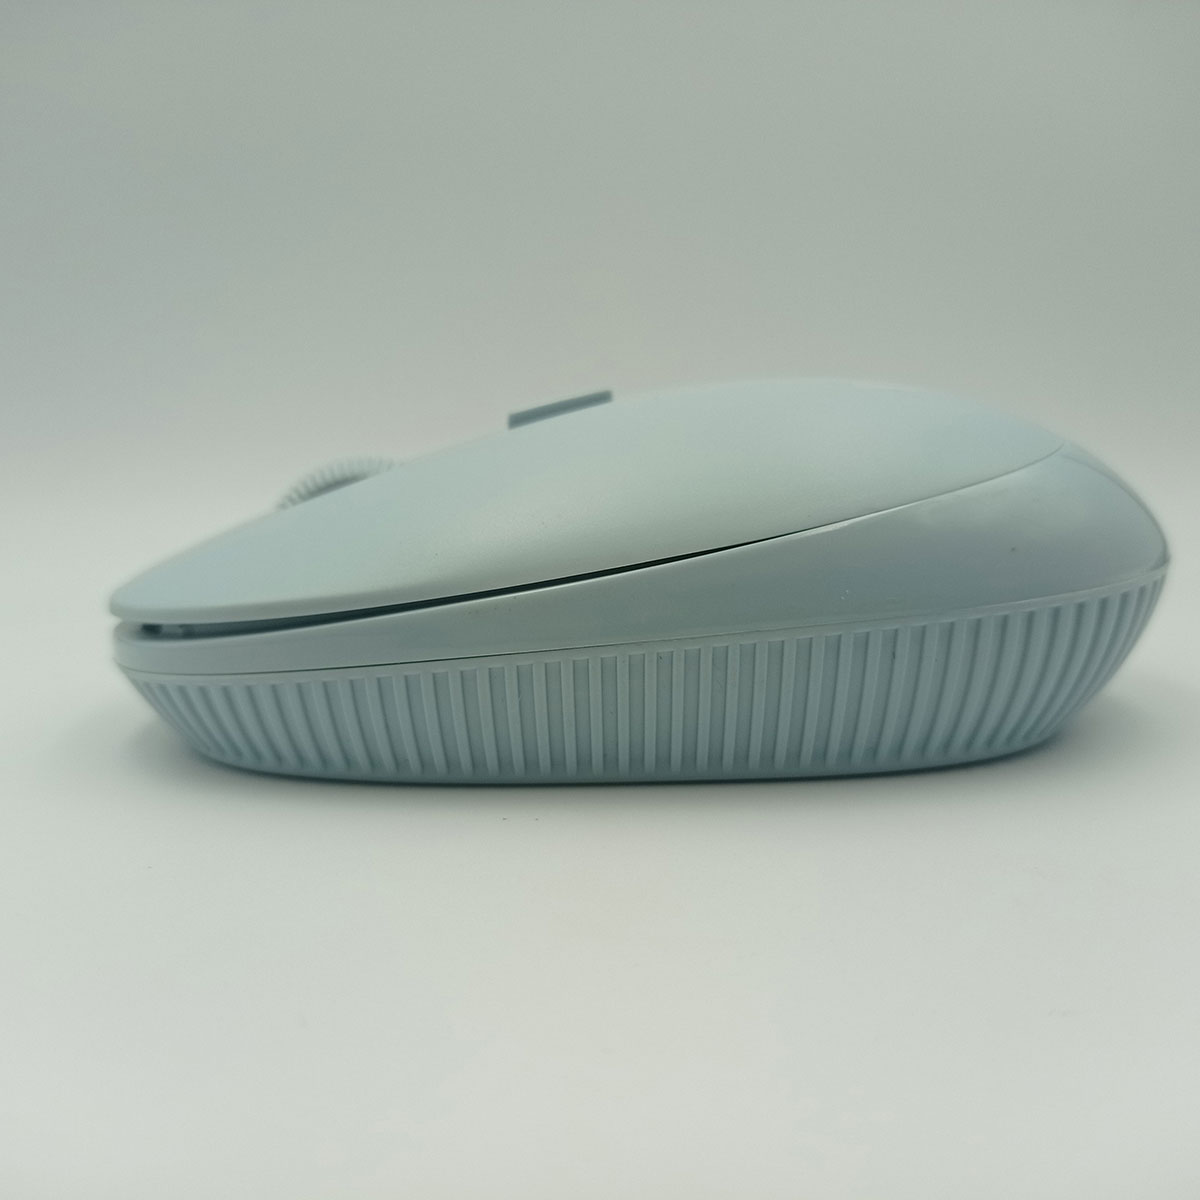 nm71-wireless-mouse-blue-03